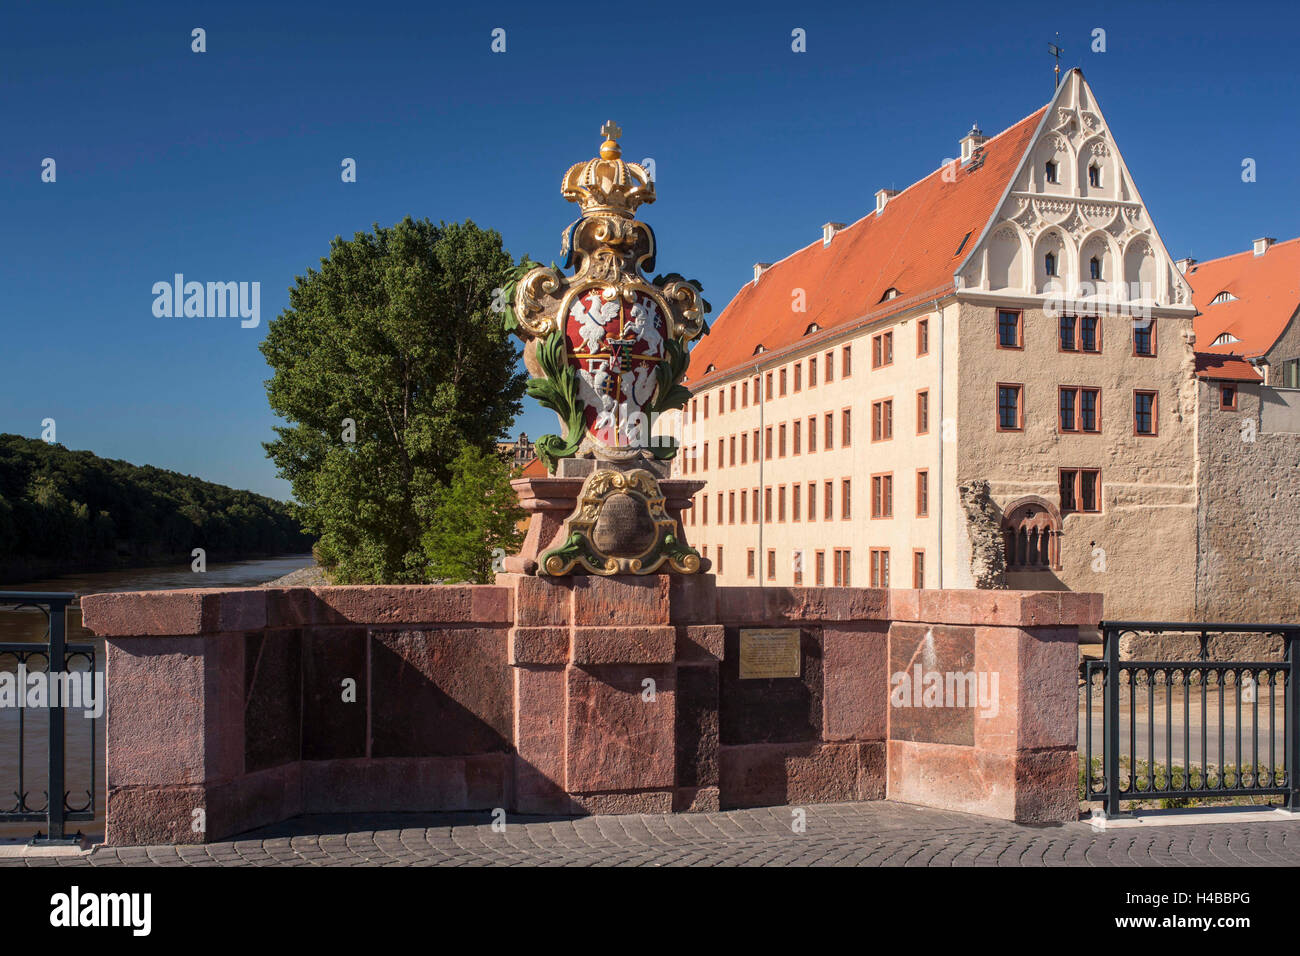 Germany, Saxony, Grimma, coat of arms in stone on the Pöppelmannbrücke Stock Photo